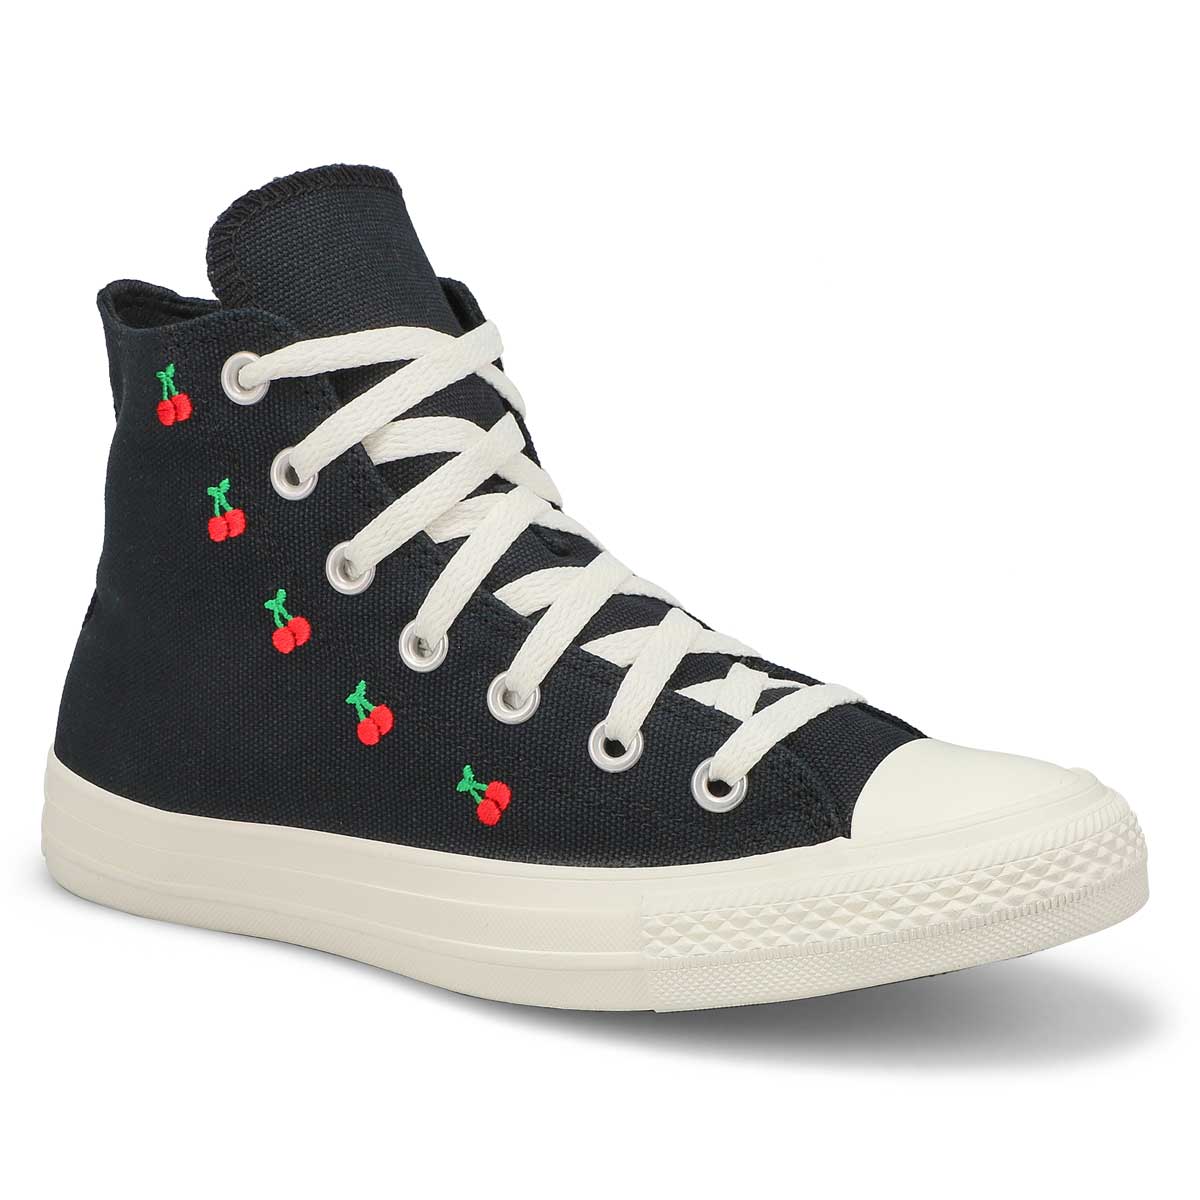 Womens Chuck Taylor All Star Cherry On Hi Top Sneaker - Black/Egret/Red